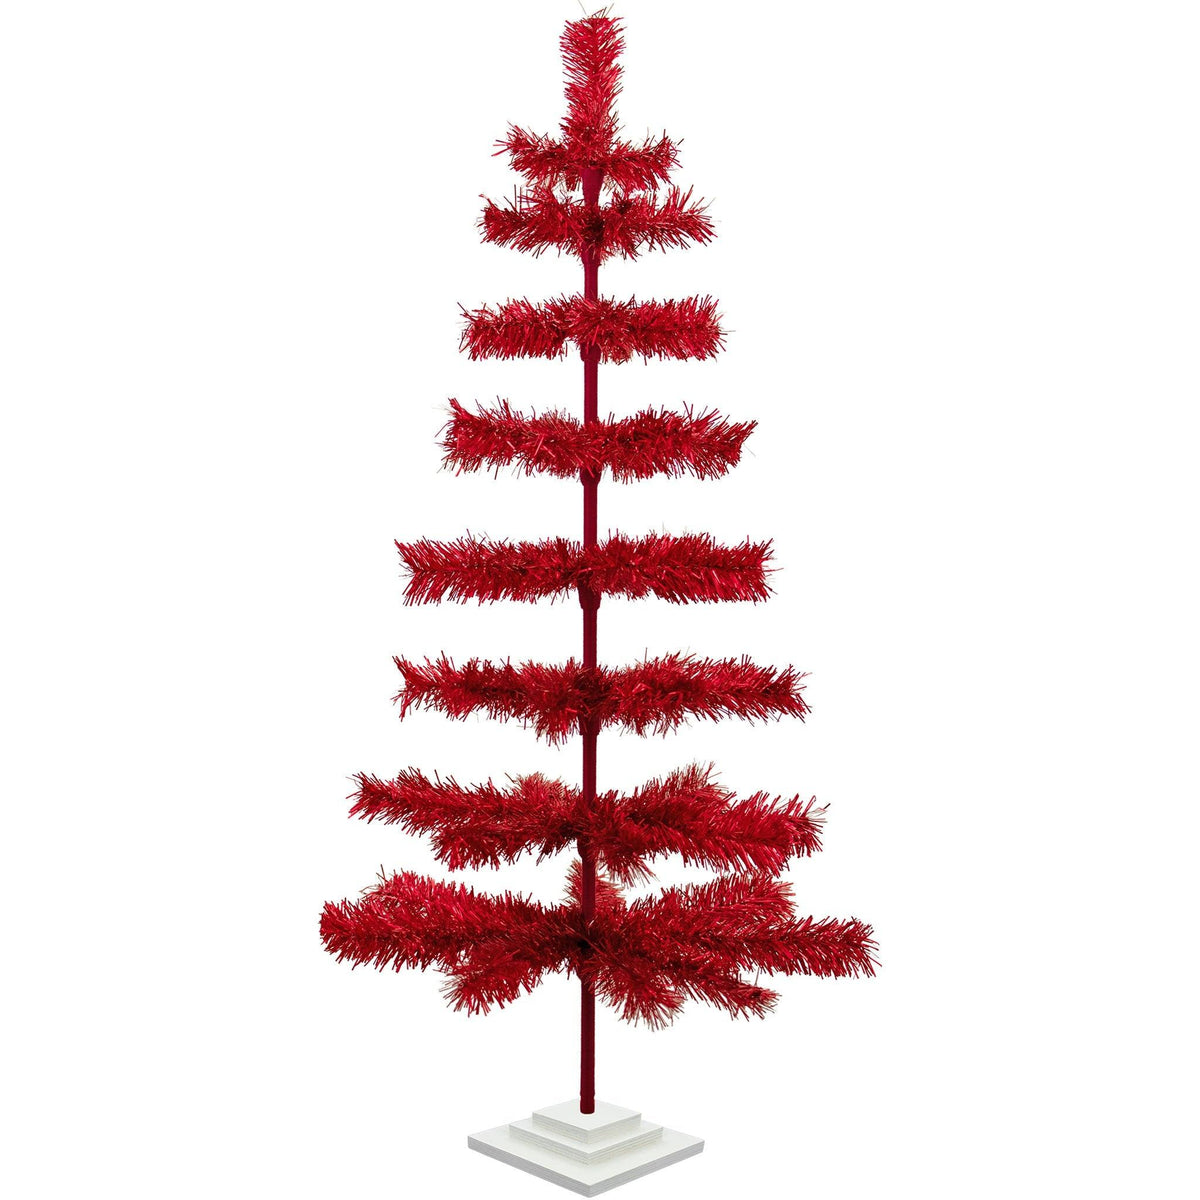 The 48 inch Tall Red Tinsel Christmas Tree from Lee Display. On sale now at leedisplay.com